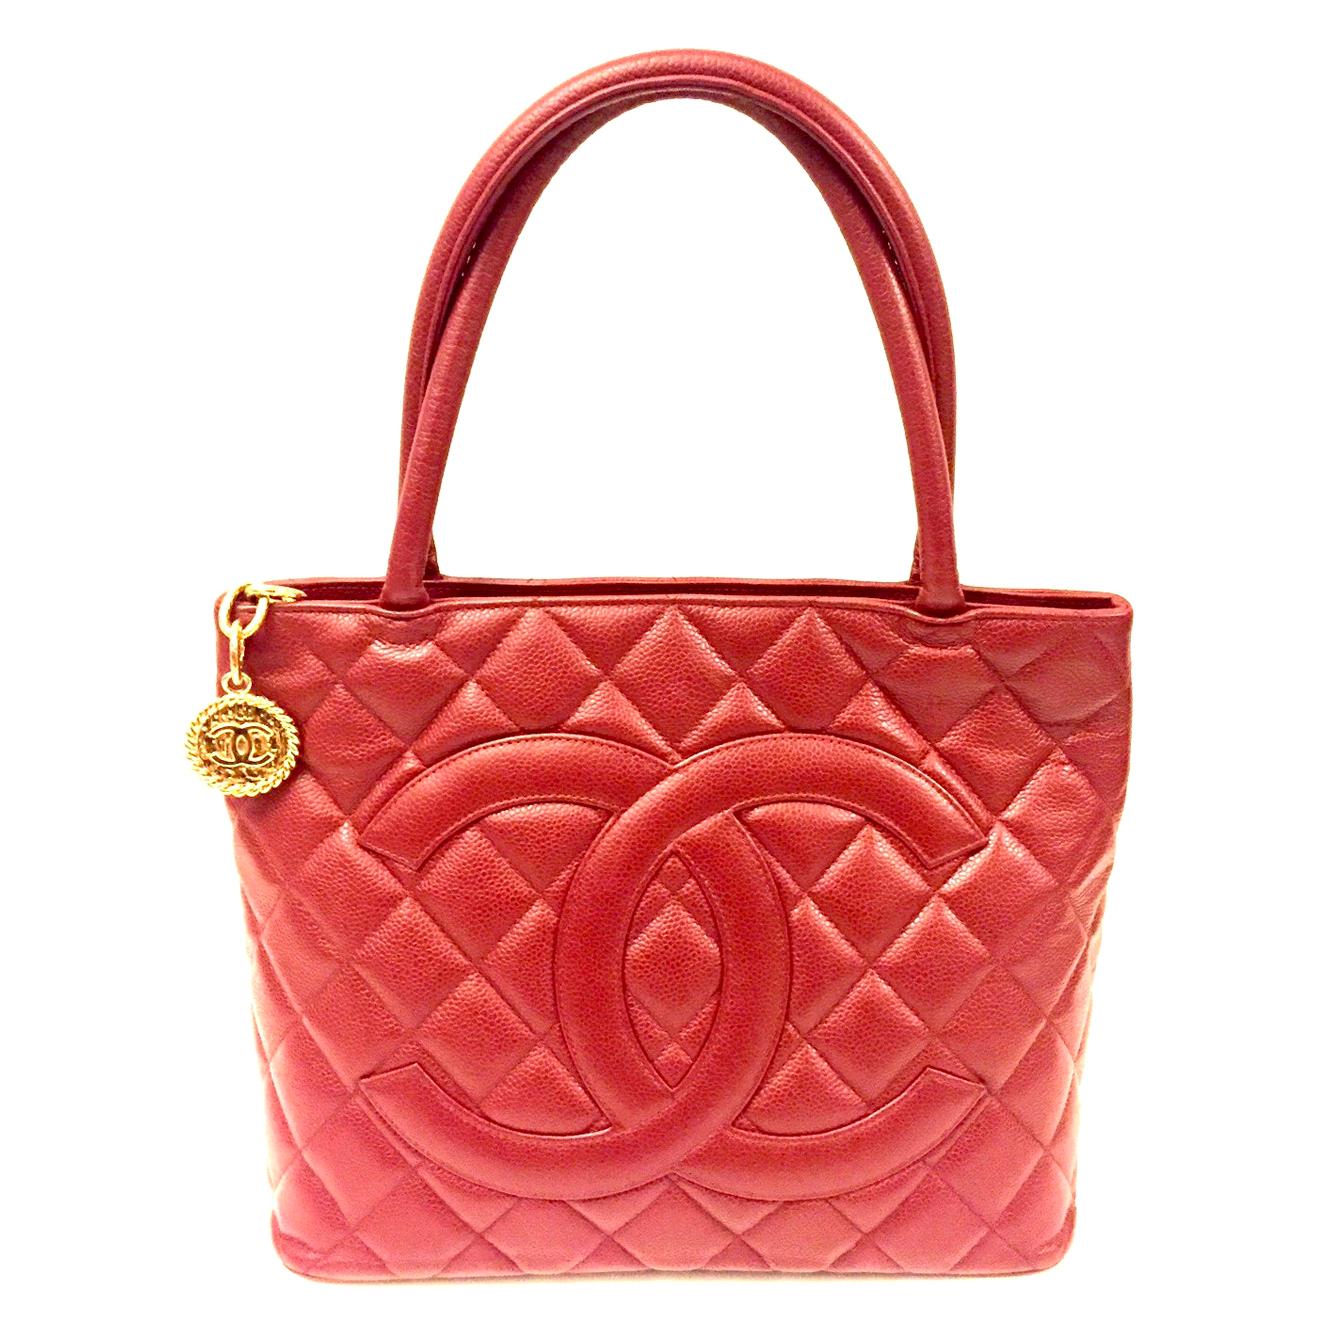 Chanel Red Quilted Caviar Tote Bag